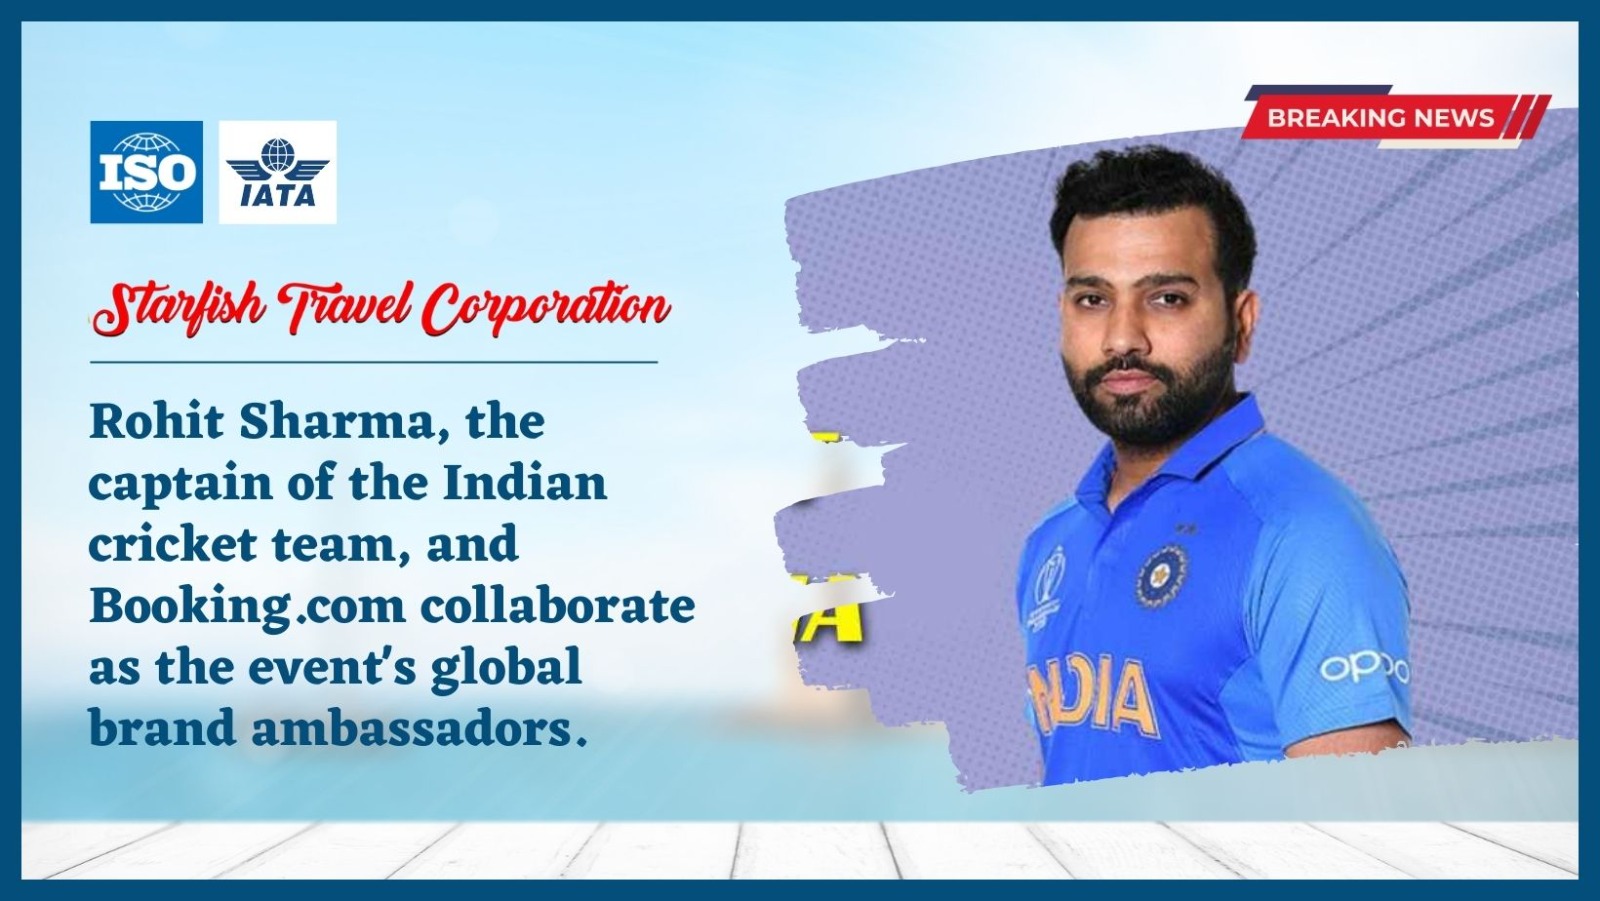 Rohit Sharma, the captain of the Indian cricket team, and Booking.com collaborate as the event’s global brand ambassadors.